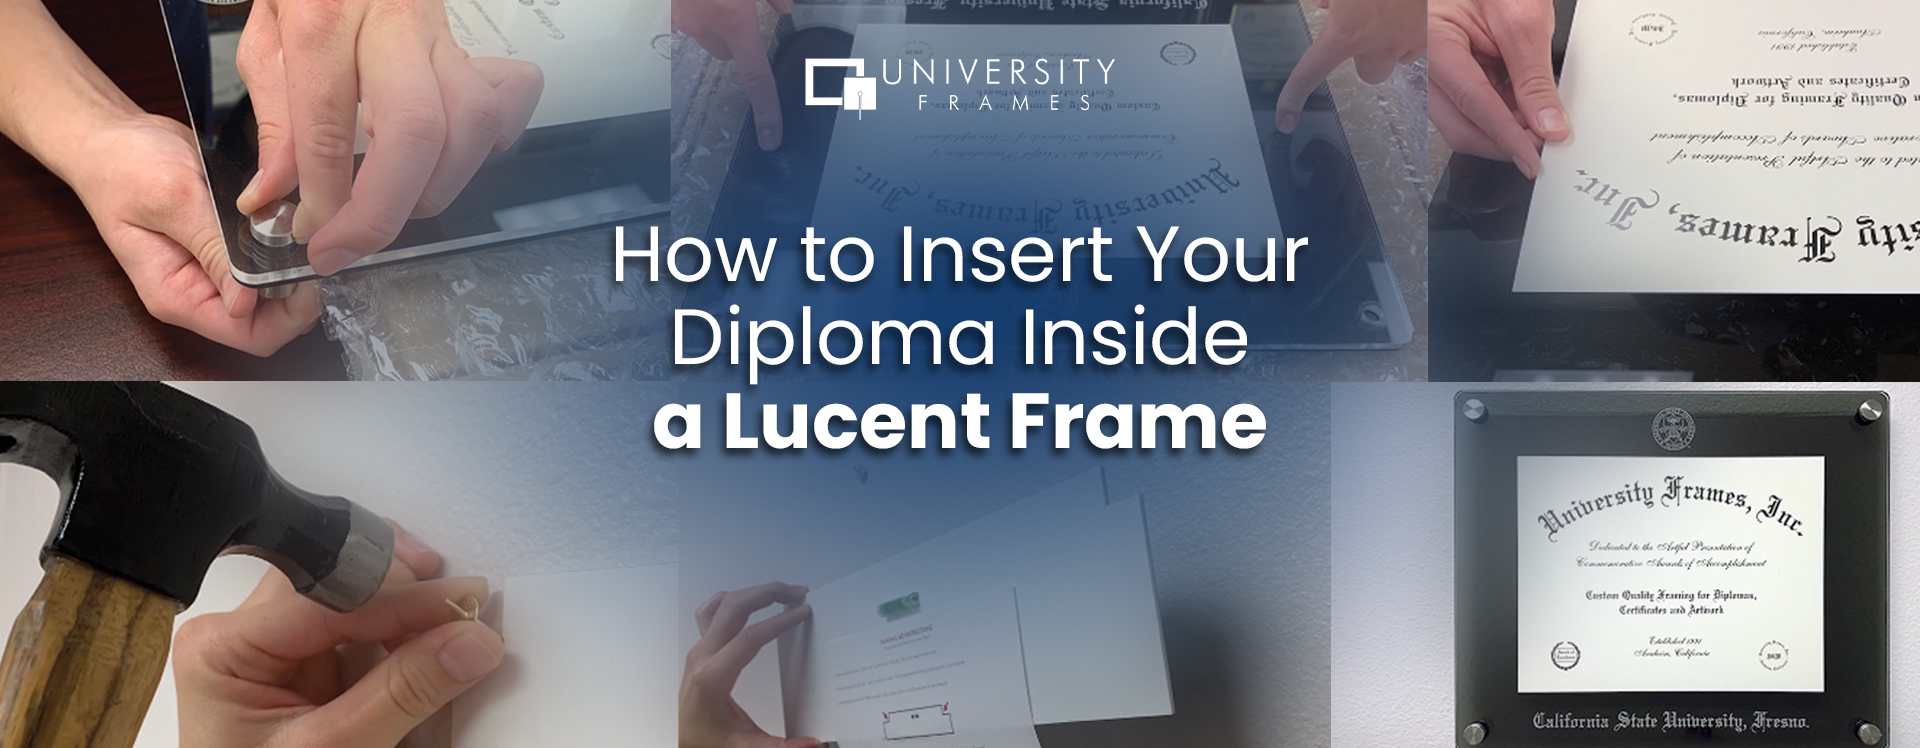 How to Insert Your Diploma Inside a Lucent Frame